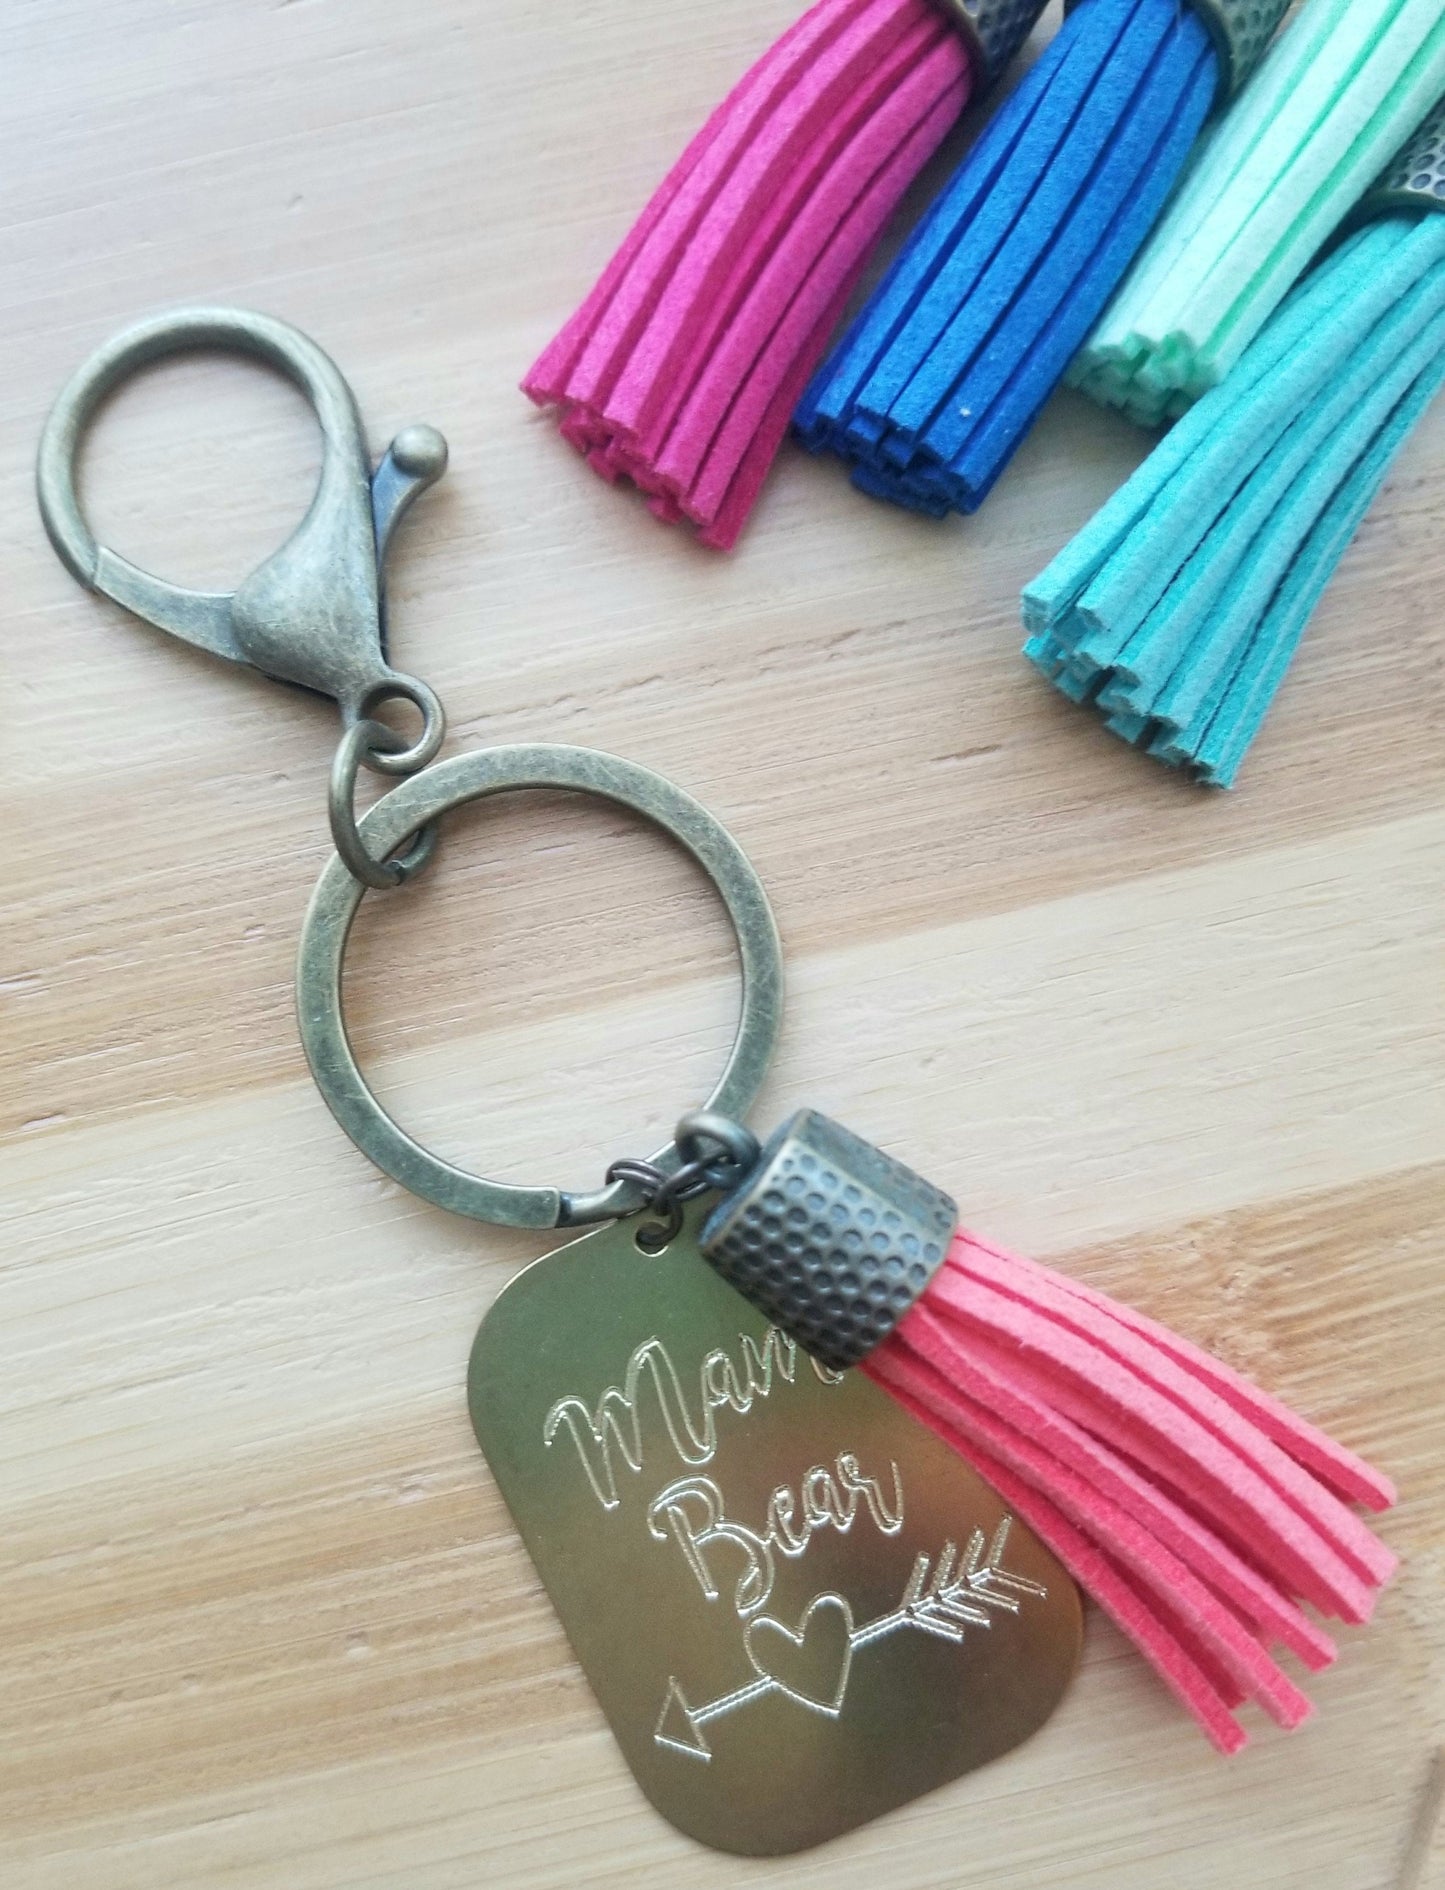 Personalized engraving on a keychain, for Mama Bear